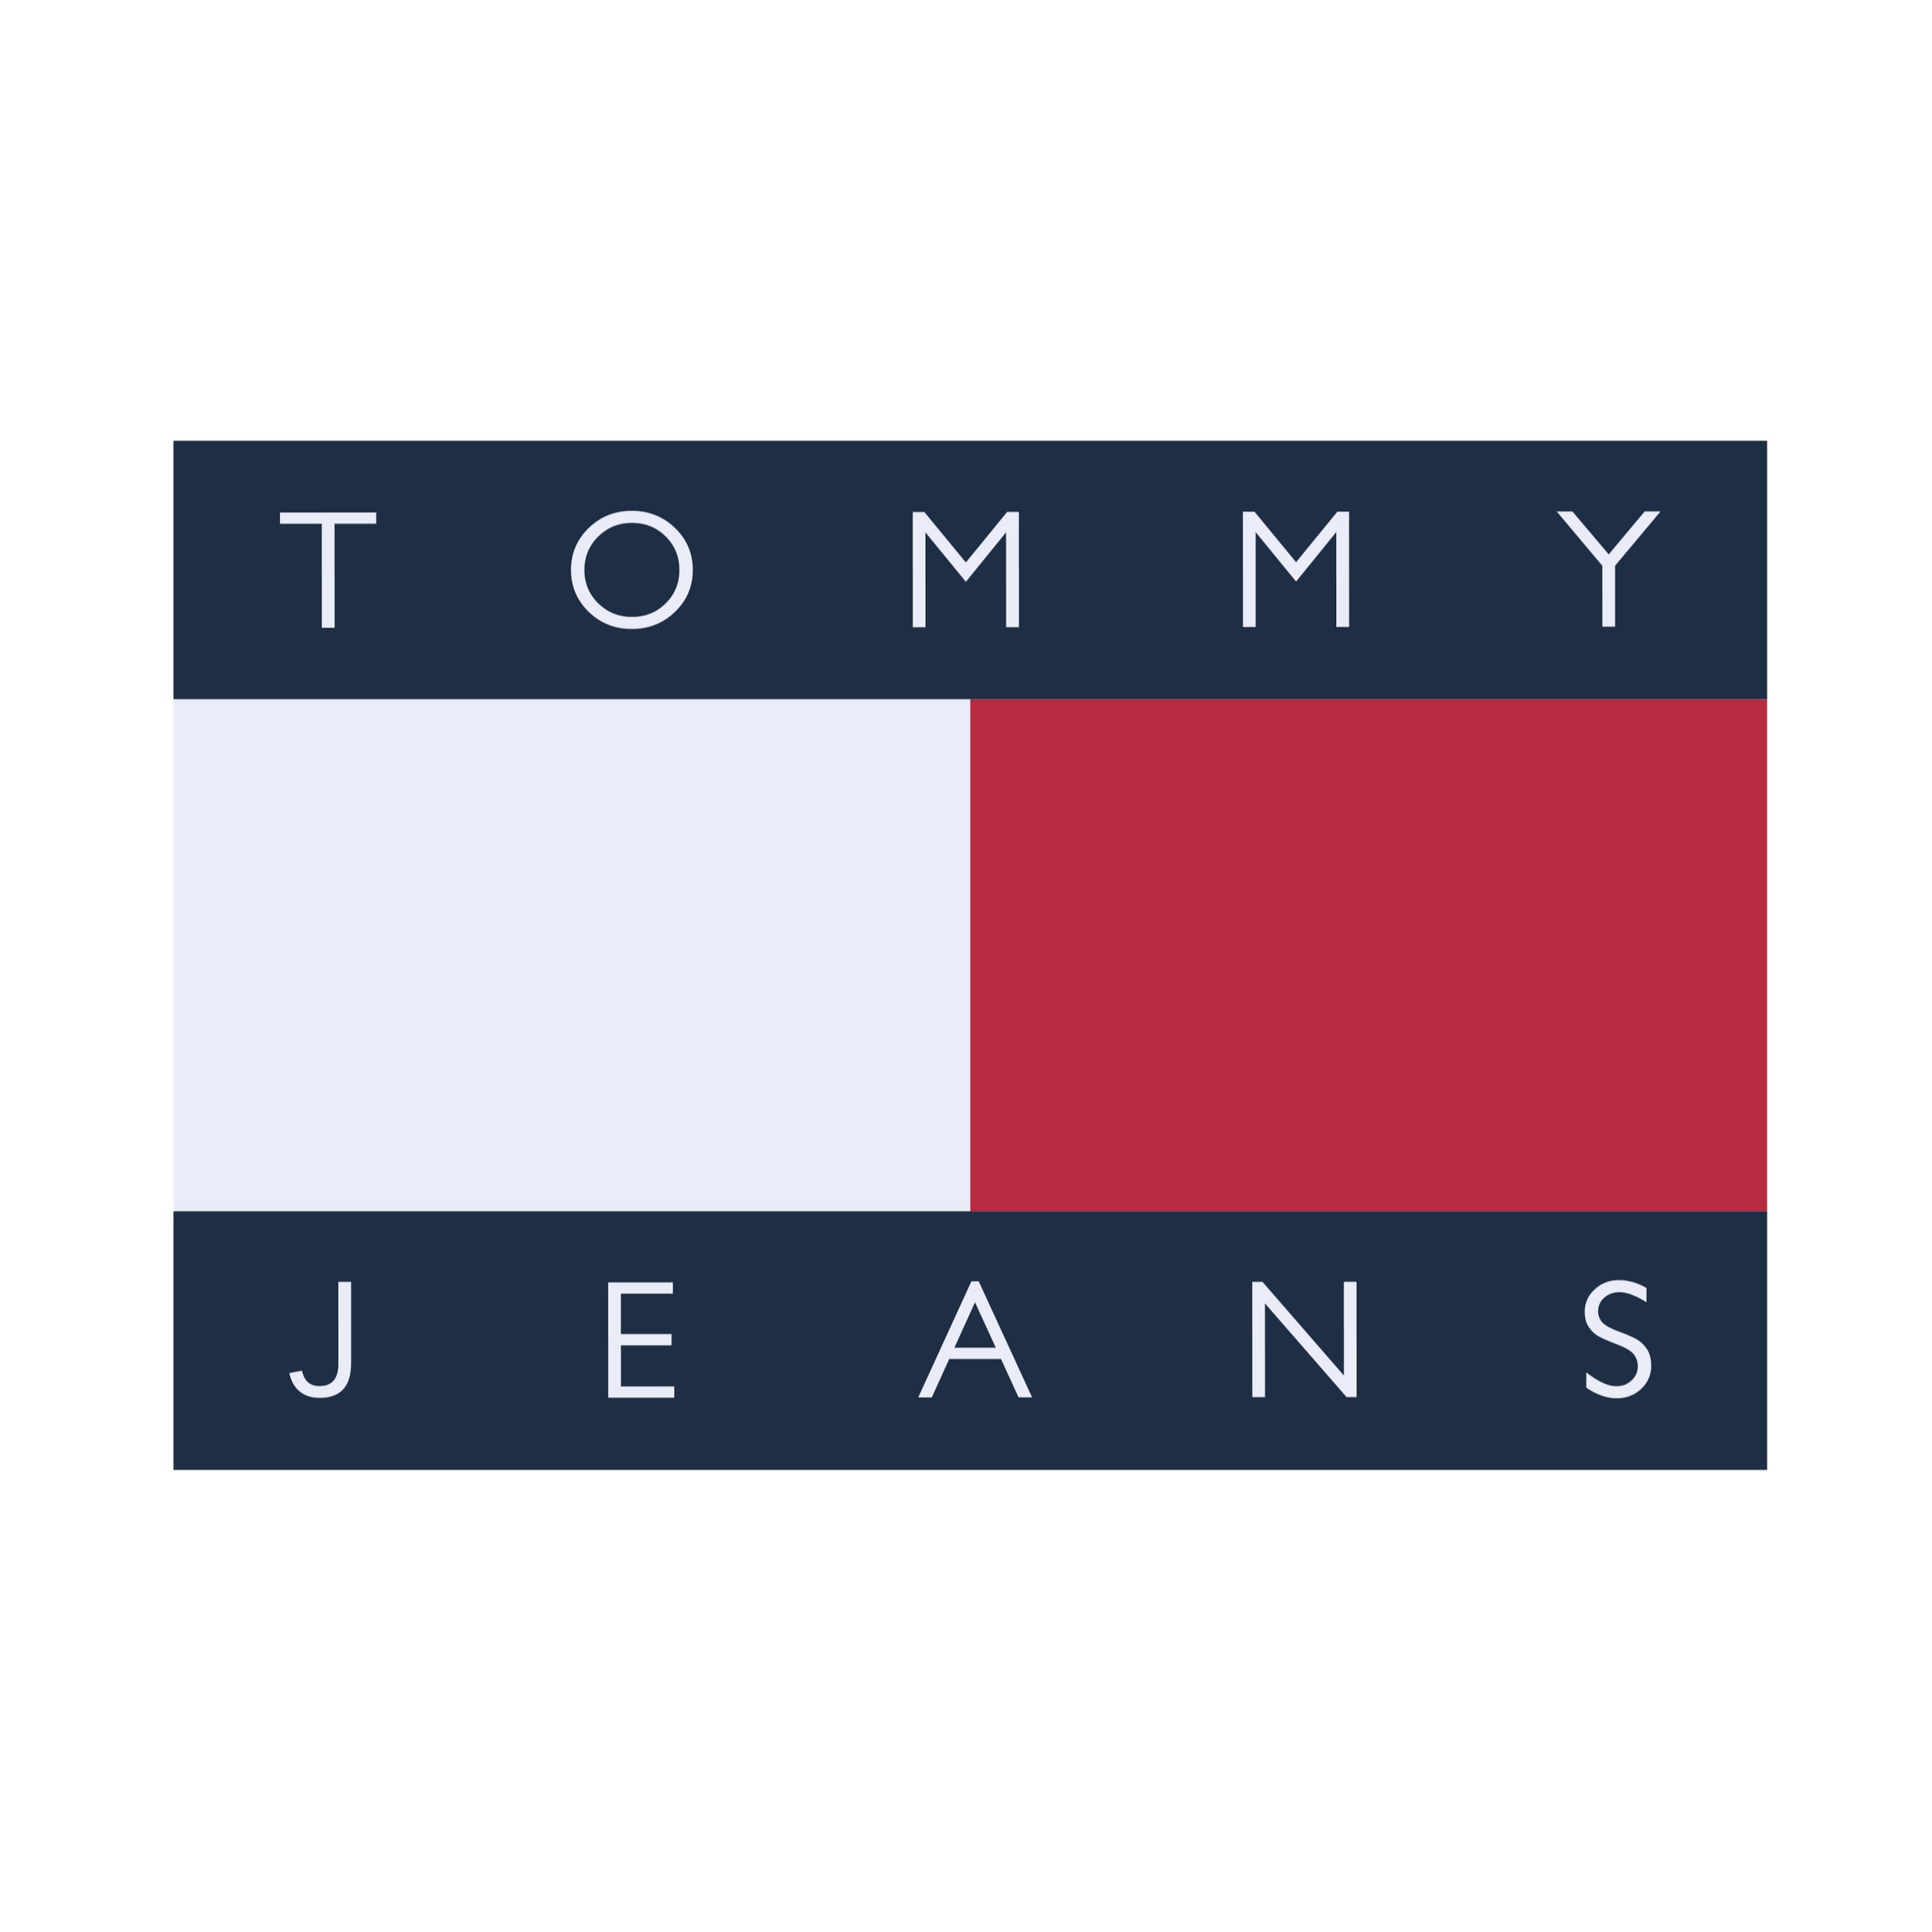 Tommy Jeans - Clothing Store - Hannover - 0511 1694534 Germany | ShowMeLocal.com